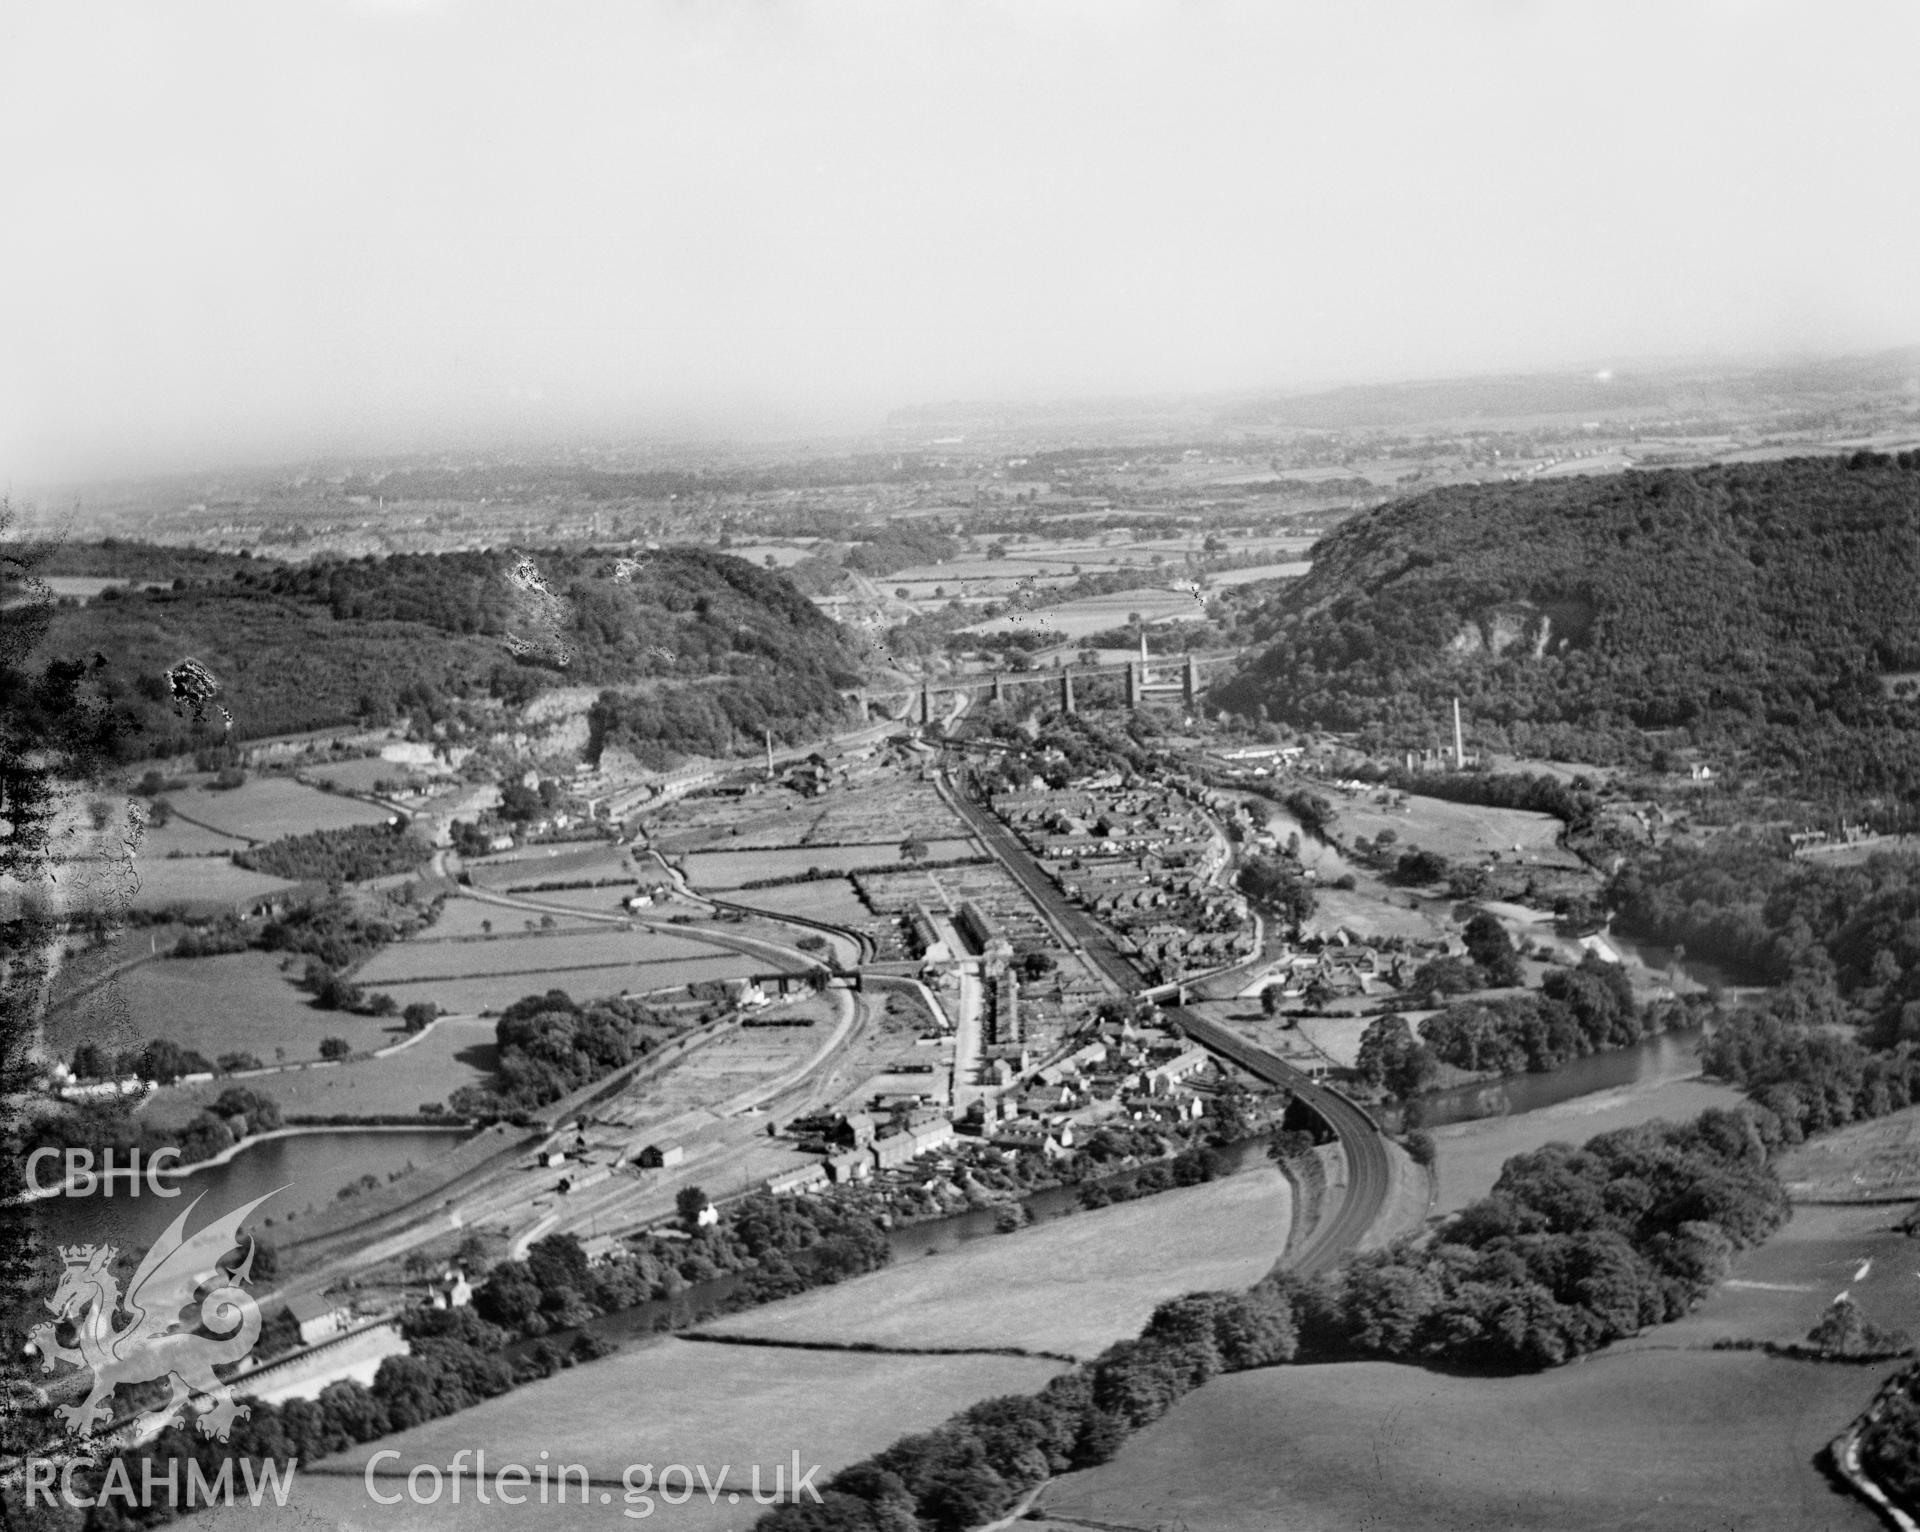 View of Taffs Well, oblique aerial view. 5?x4? black and white glass plate negative.